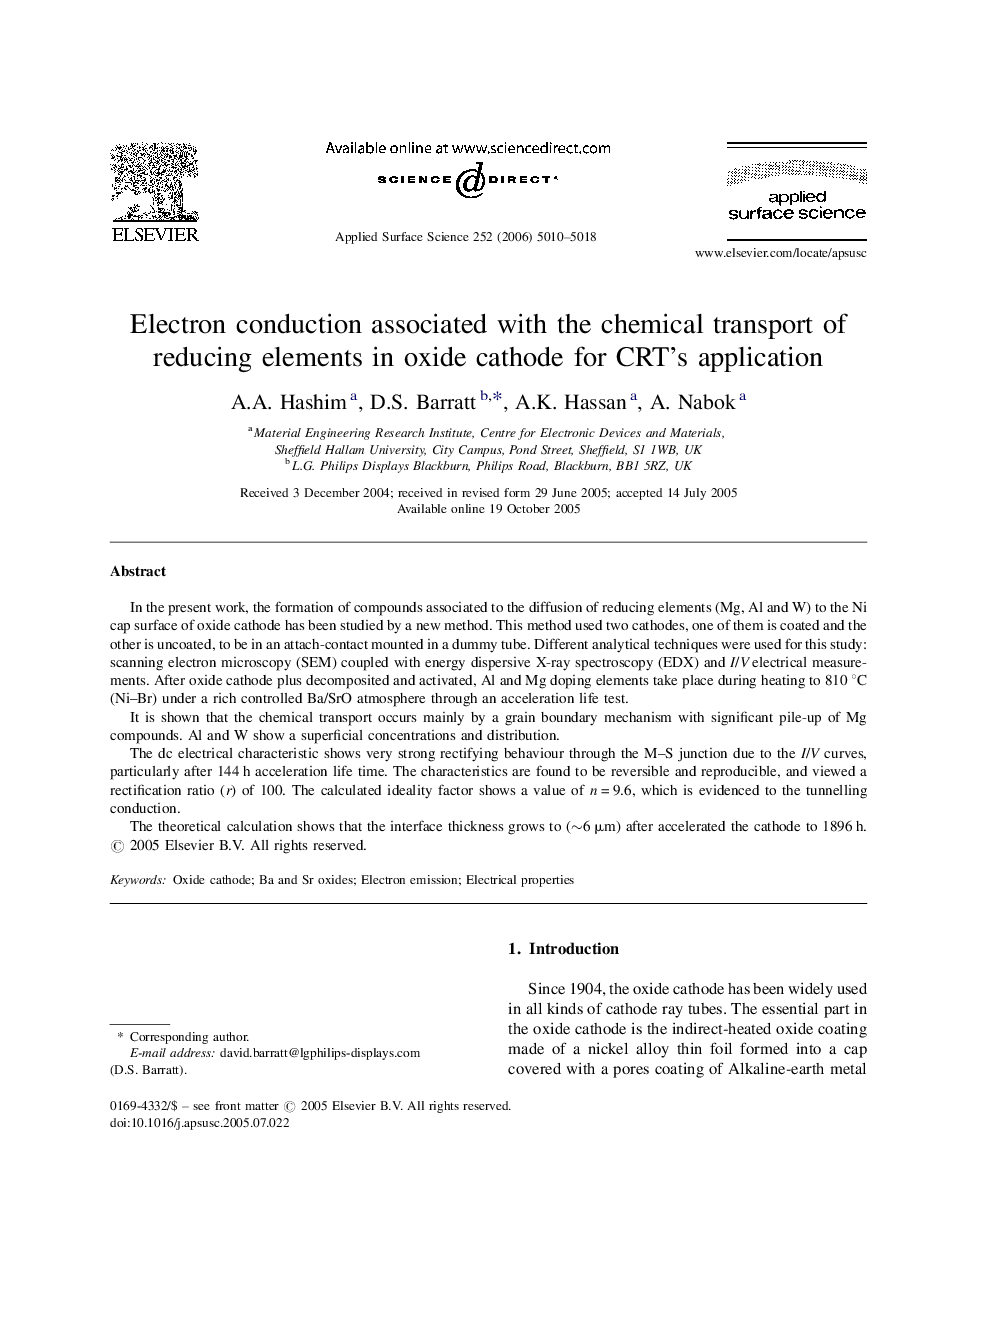 Electron conduction associated with the chemical transport of reducing elements in oxide cathode for CRT's application